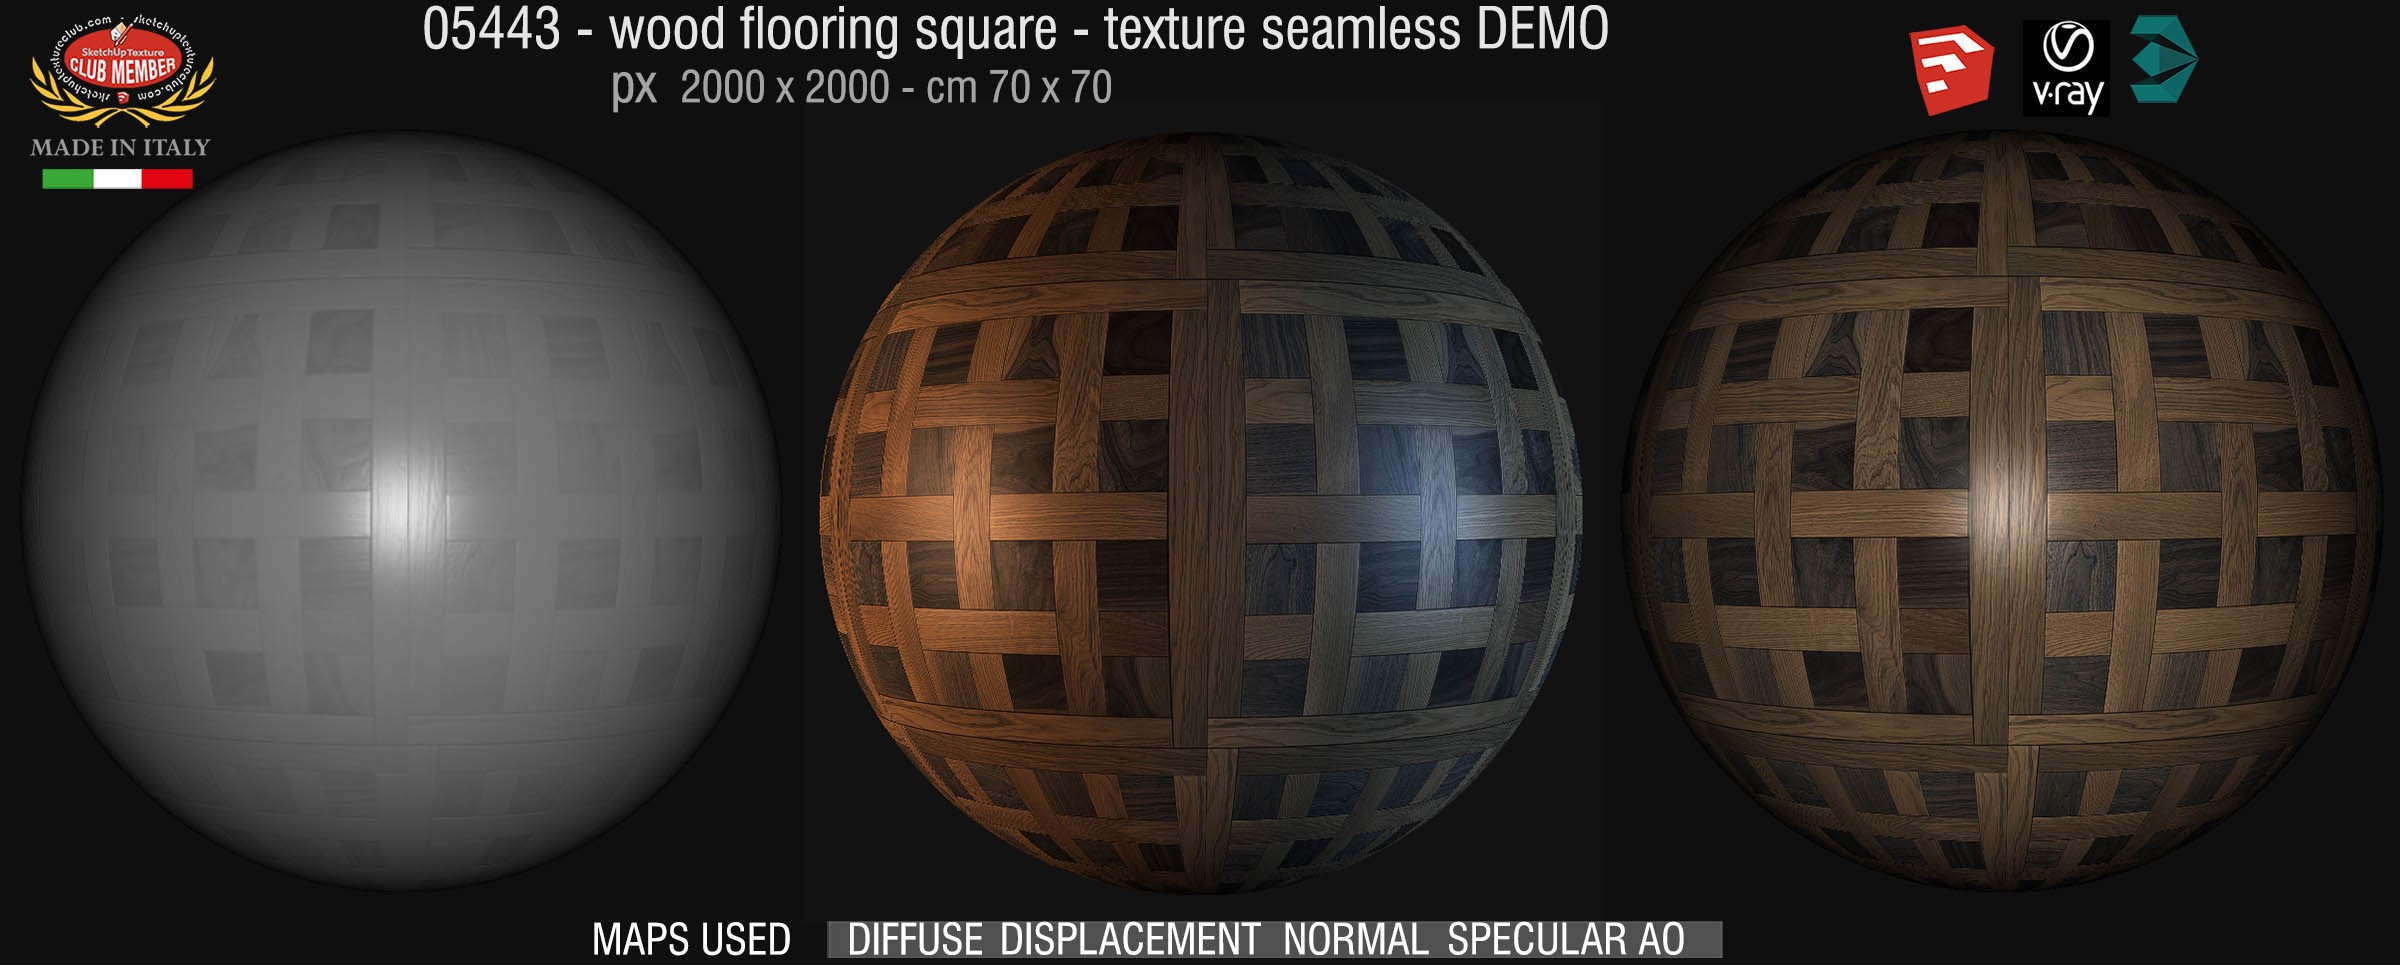 05443 Wood flooring square texture seamless + maps DEMO